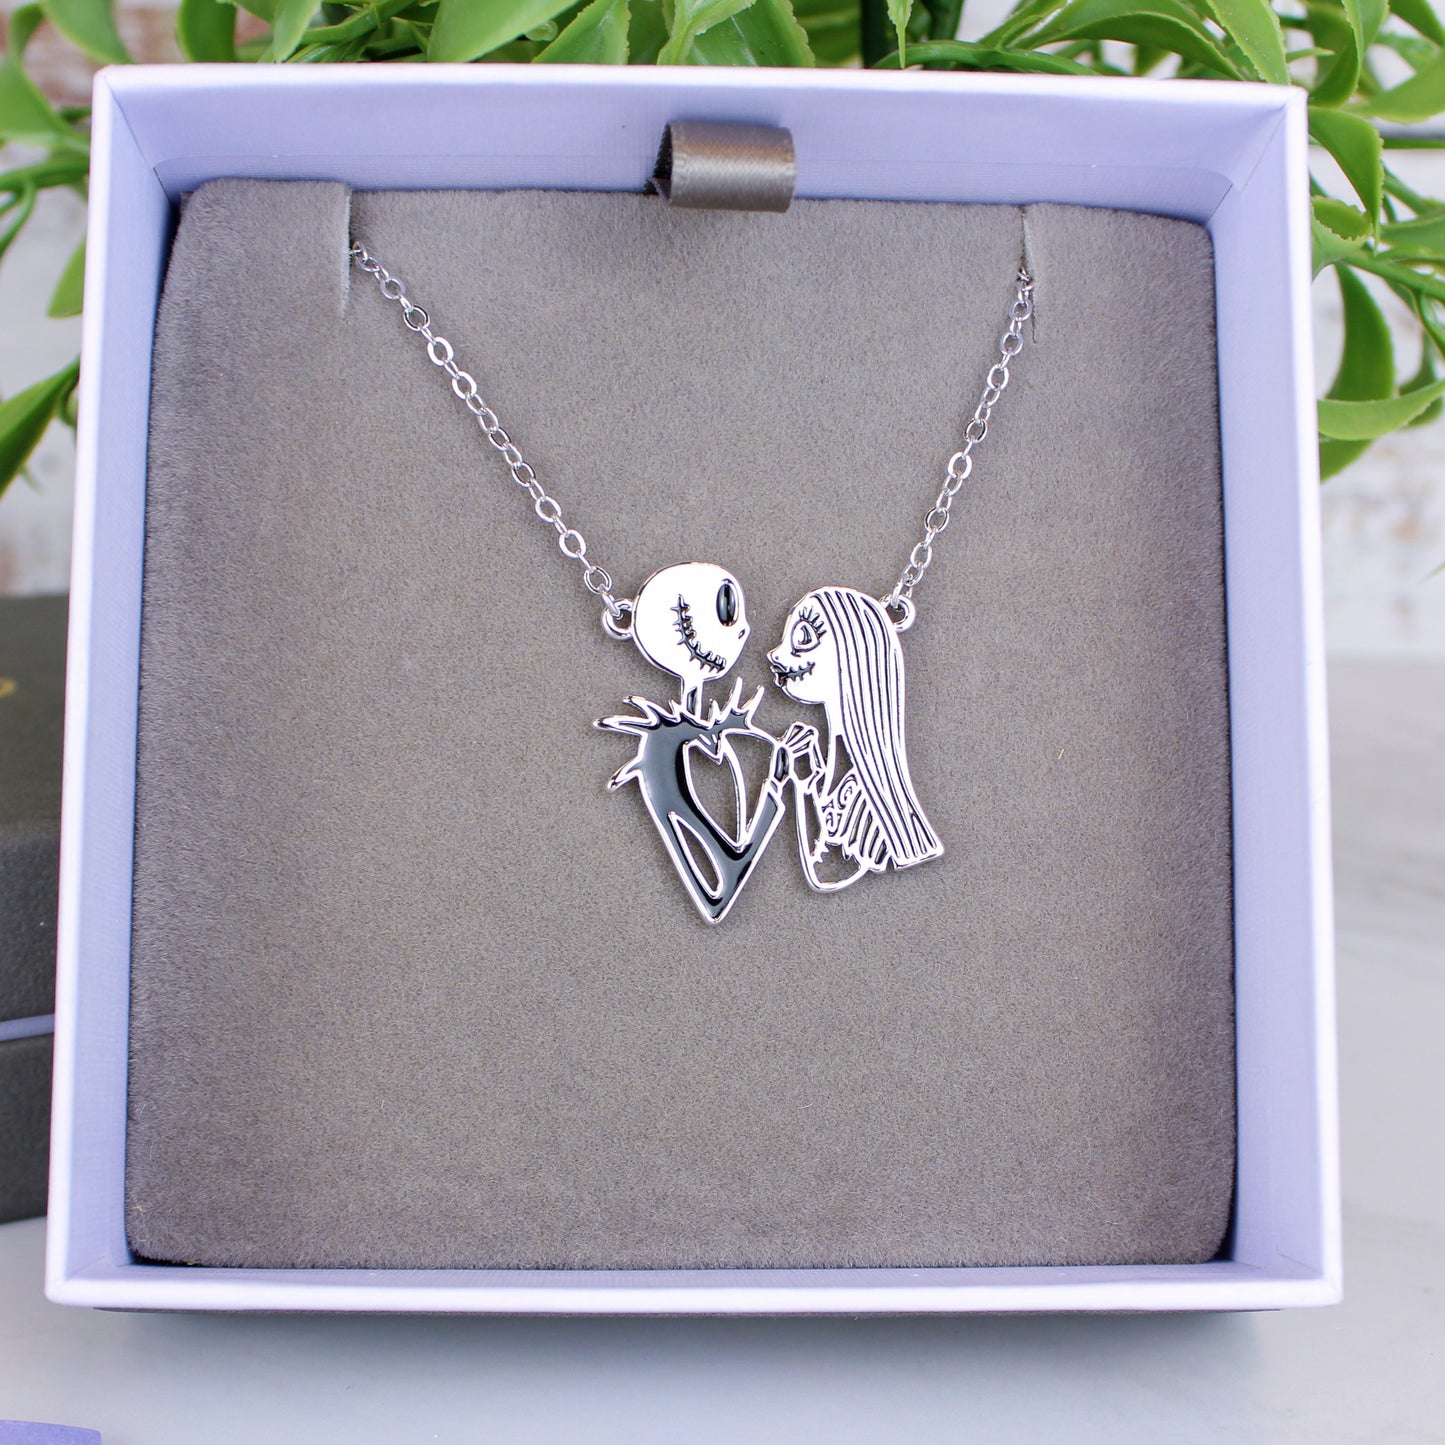 Celebrate “Valloween” with Items Inspired by Jack and Sally's Love - D23